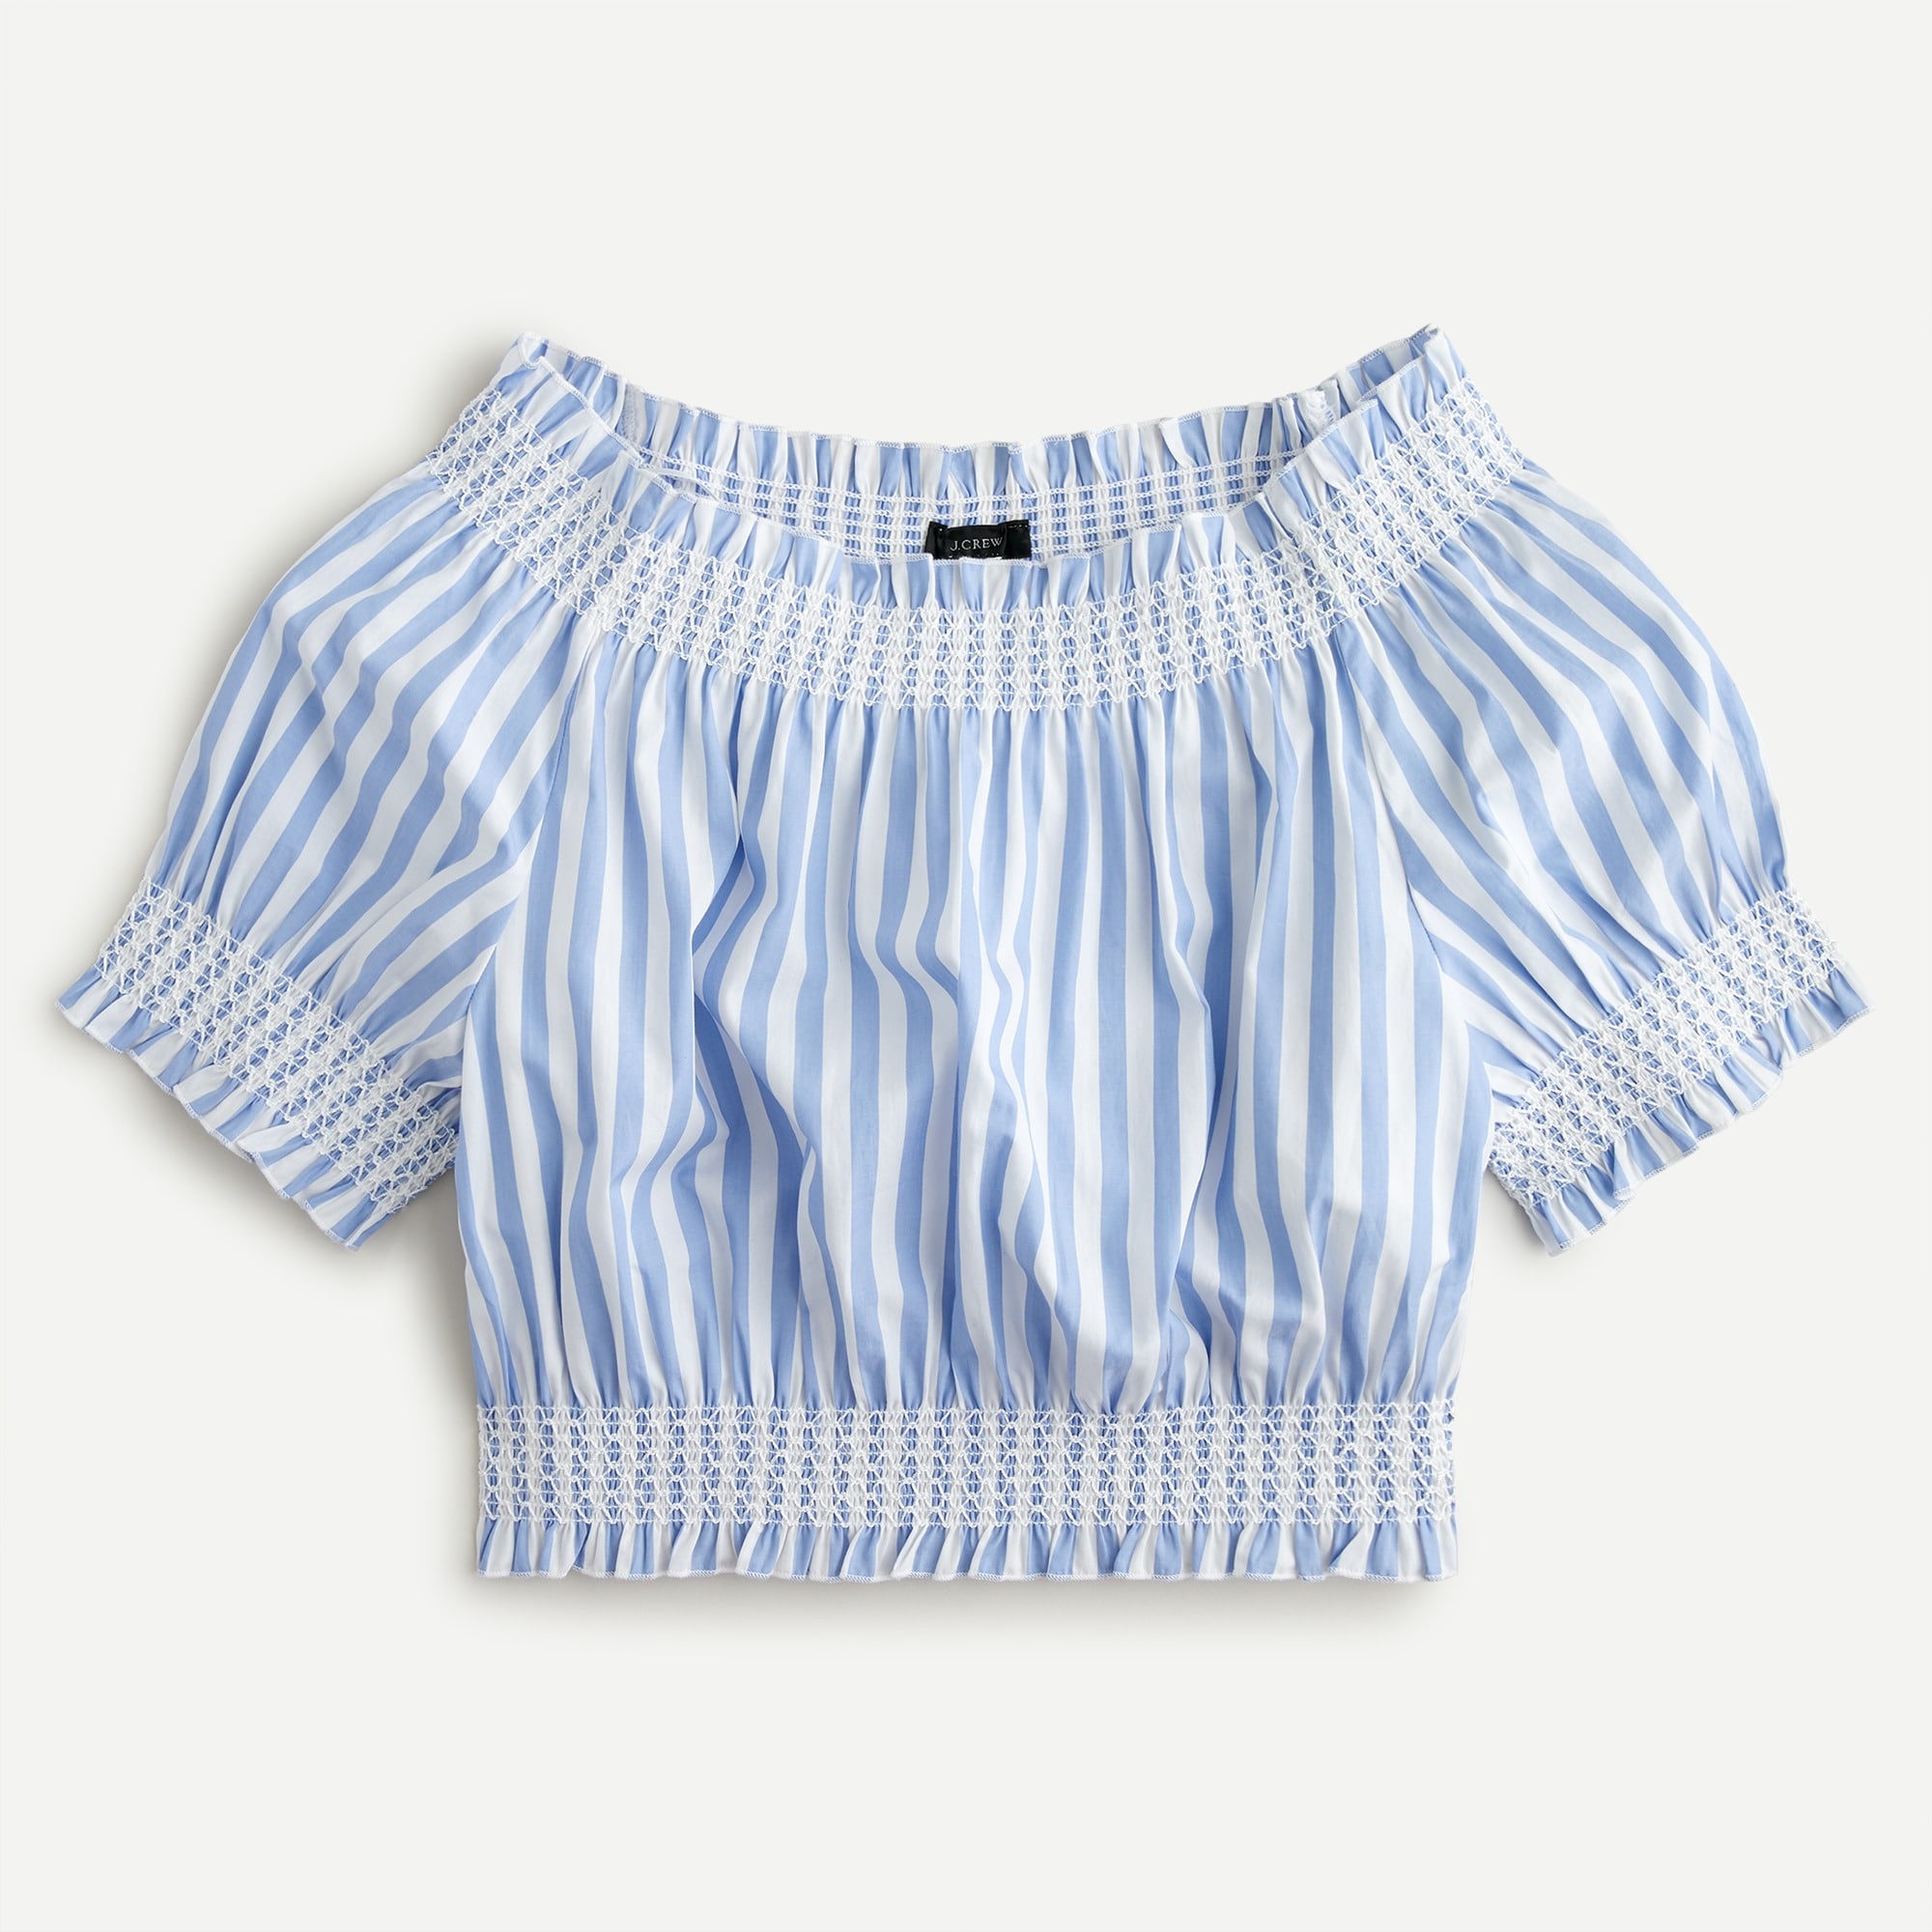 J.Crew: Puff-sleeve Smocked Top In Stripe For Women